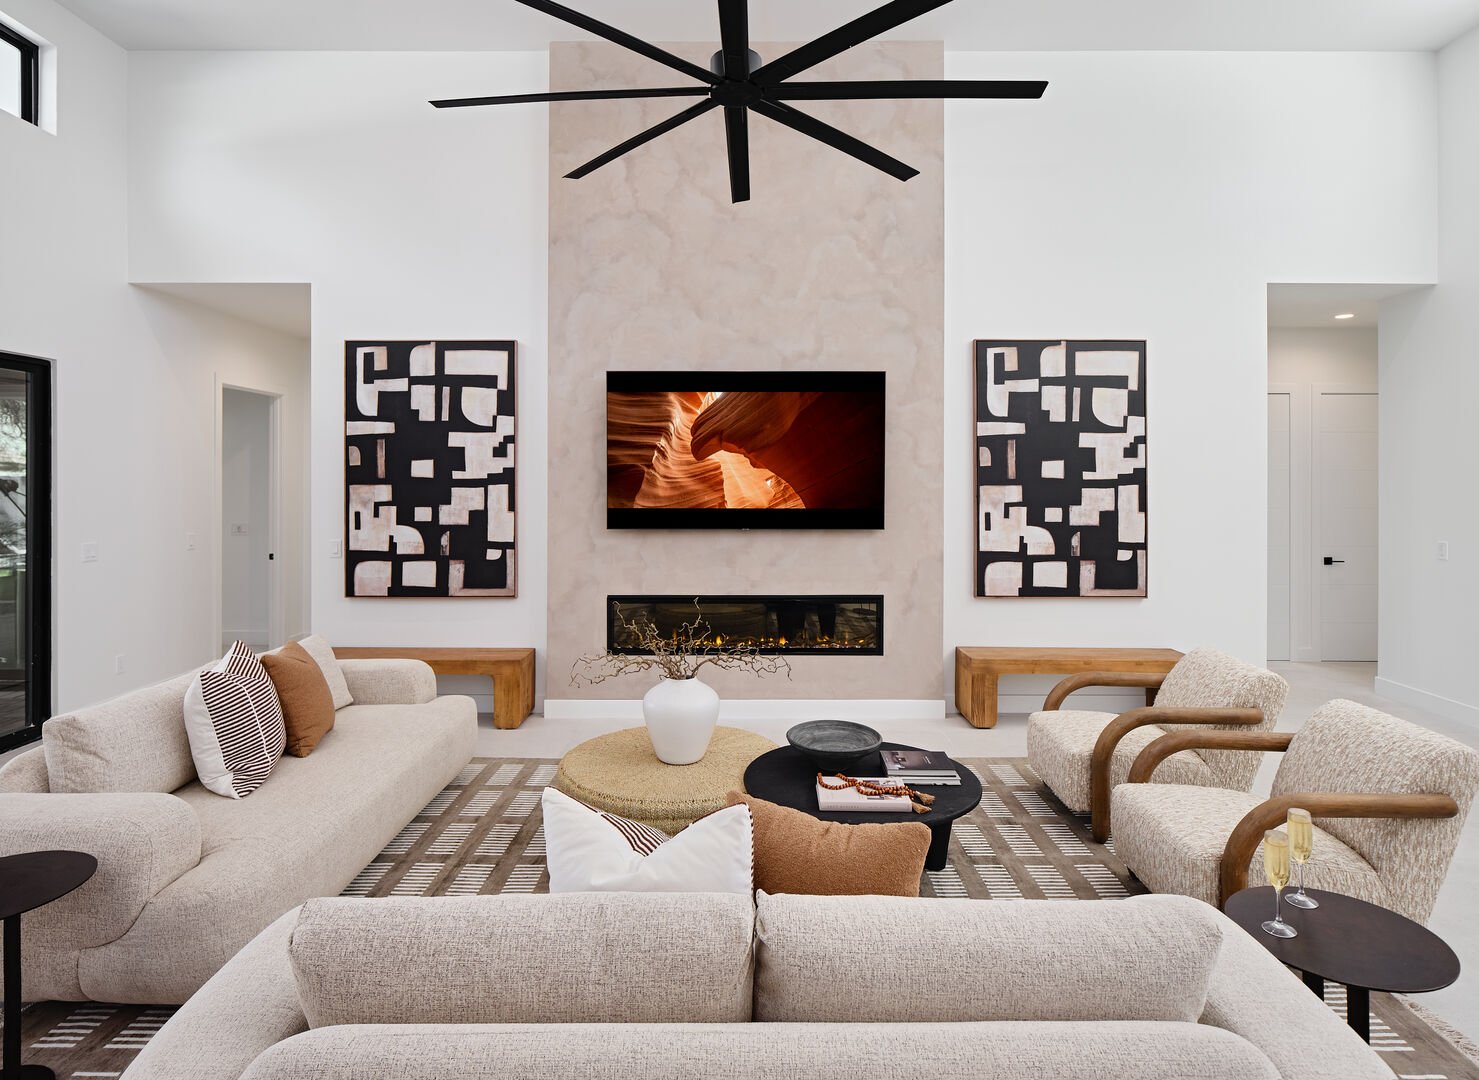 Grand open-concept living space with designer decor, featuring a fireplace and Smart TV.